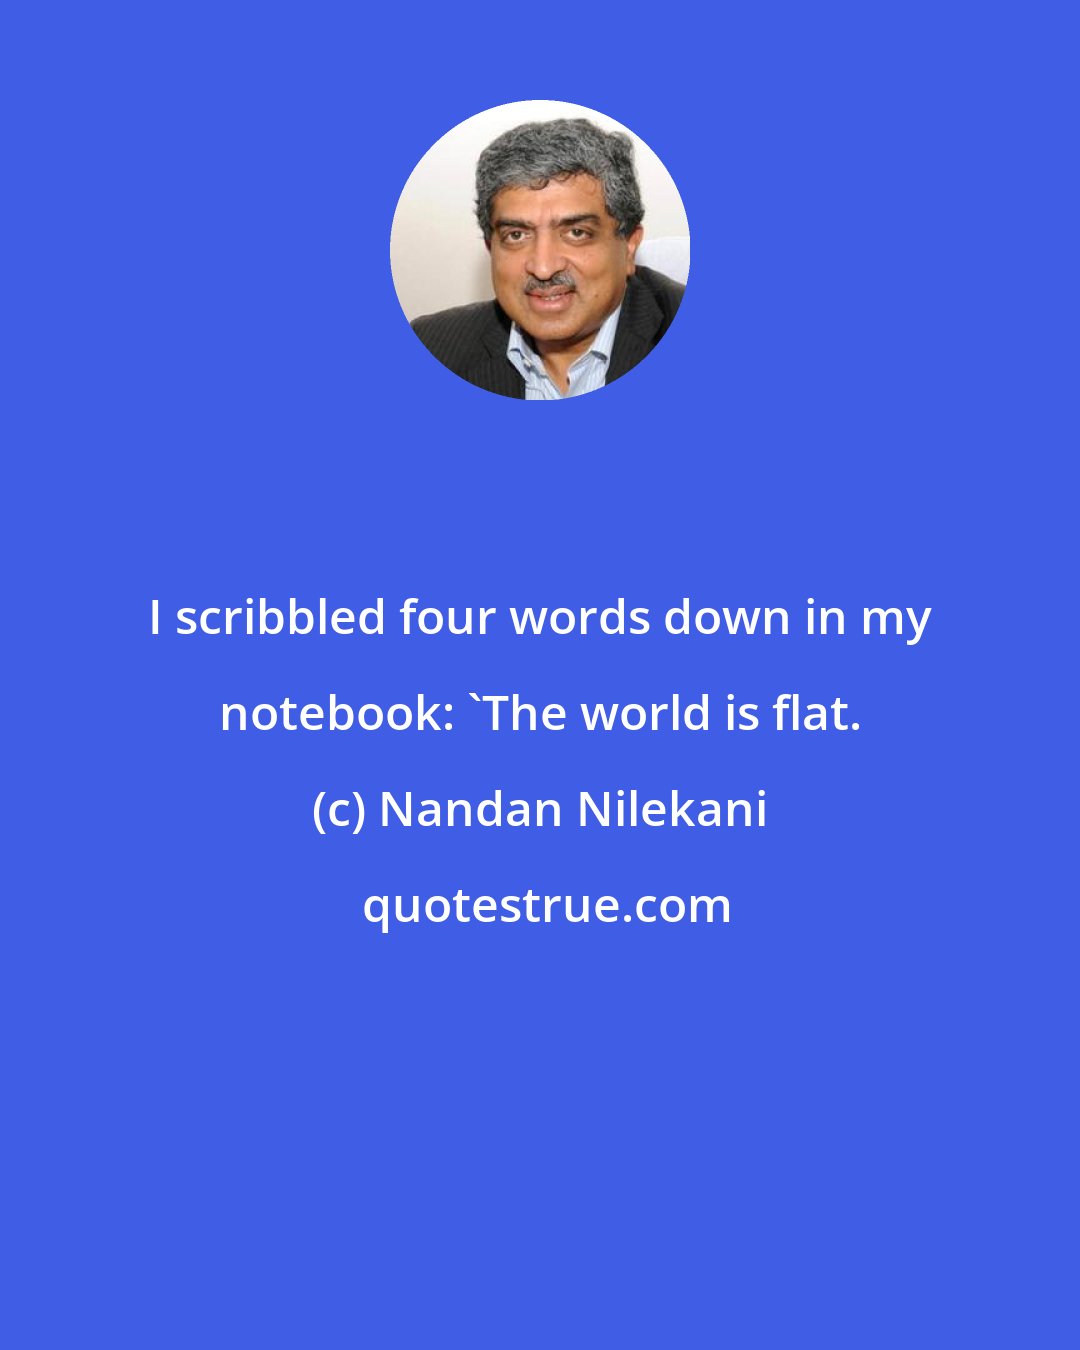 Nandan Nilekani: I scribbled four words down in my notebook: 'The world is flat.